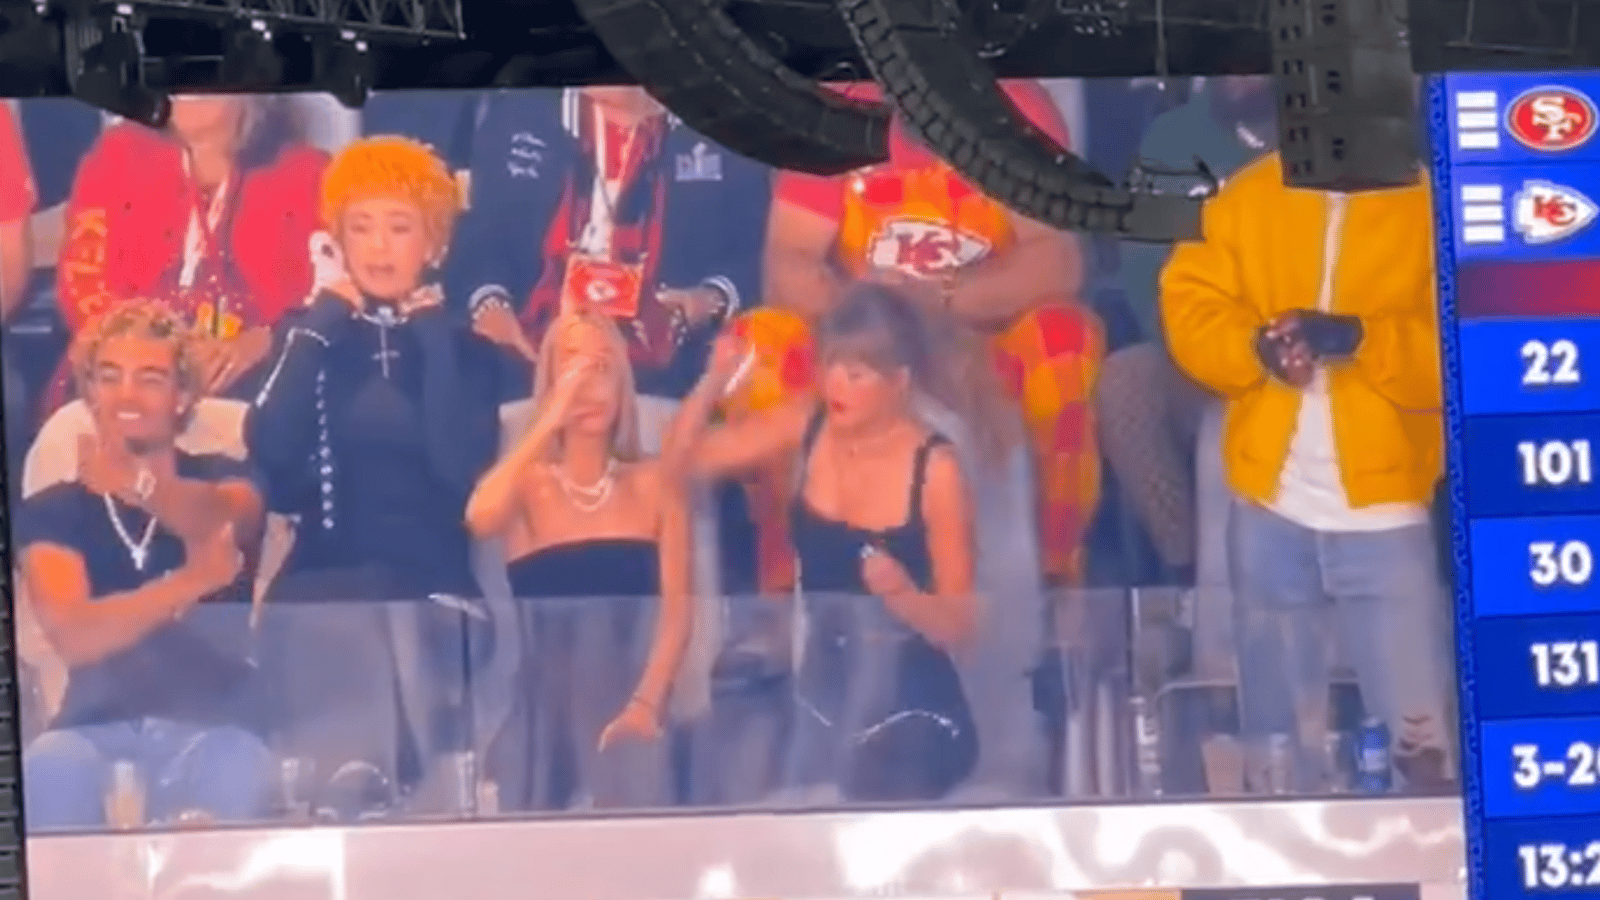 Fans BOO Taylor Swift as she chugs a beer